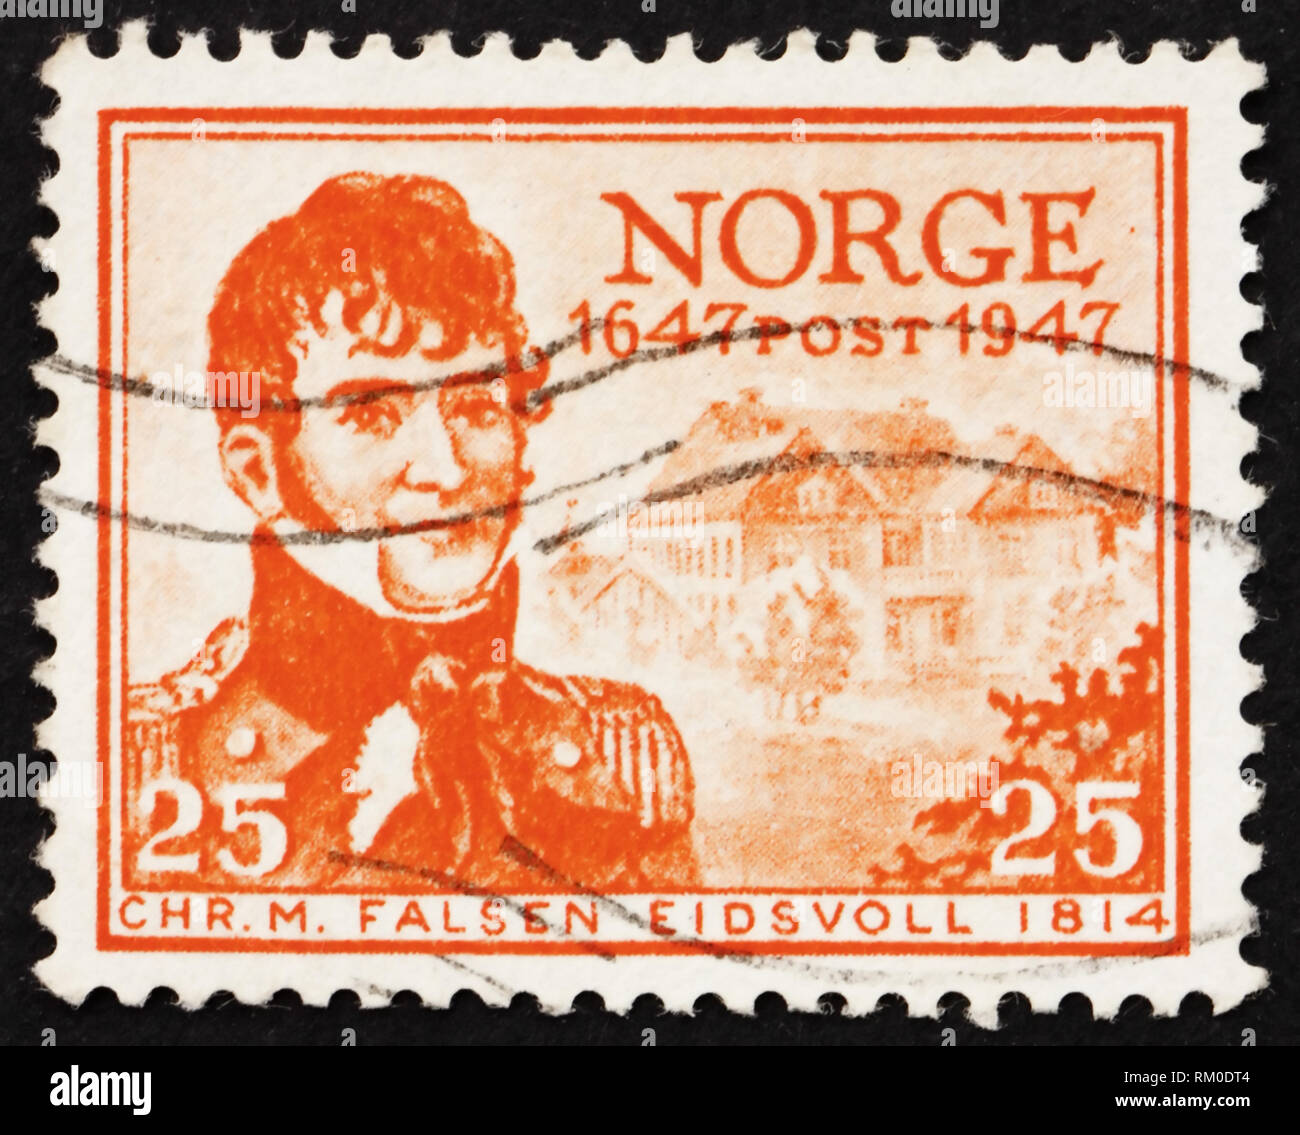 NORWAY - CIRCA 1947: a stamp printed in the Norway shows Christian Magnus Falsen, Norwegian constitutional father, circa 1947 Stock Photo